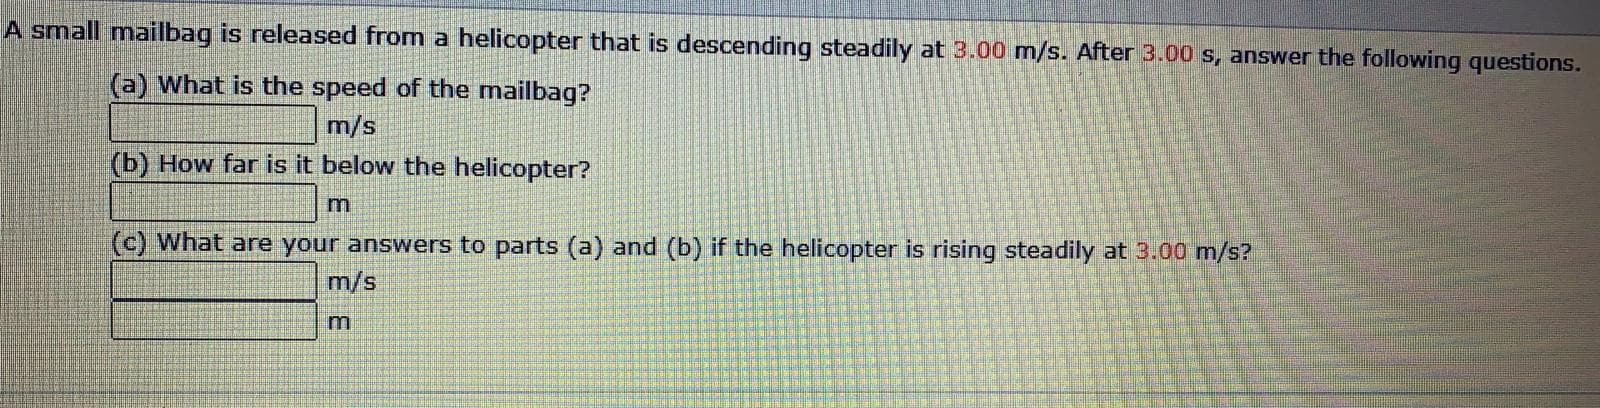 A small mailbag is released from a helicopter that is descending steadily at 3.00 m/s. After 3.00 s, answer the following questions.
(a) What is the speed of the mailbag?
m/s
(b) How far is it below the helicopter?
(c) What are your answers to parts (a) and (b) if the helicopter is rising steadily at 3.00 m/s?
m/s
m
